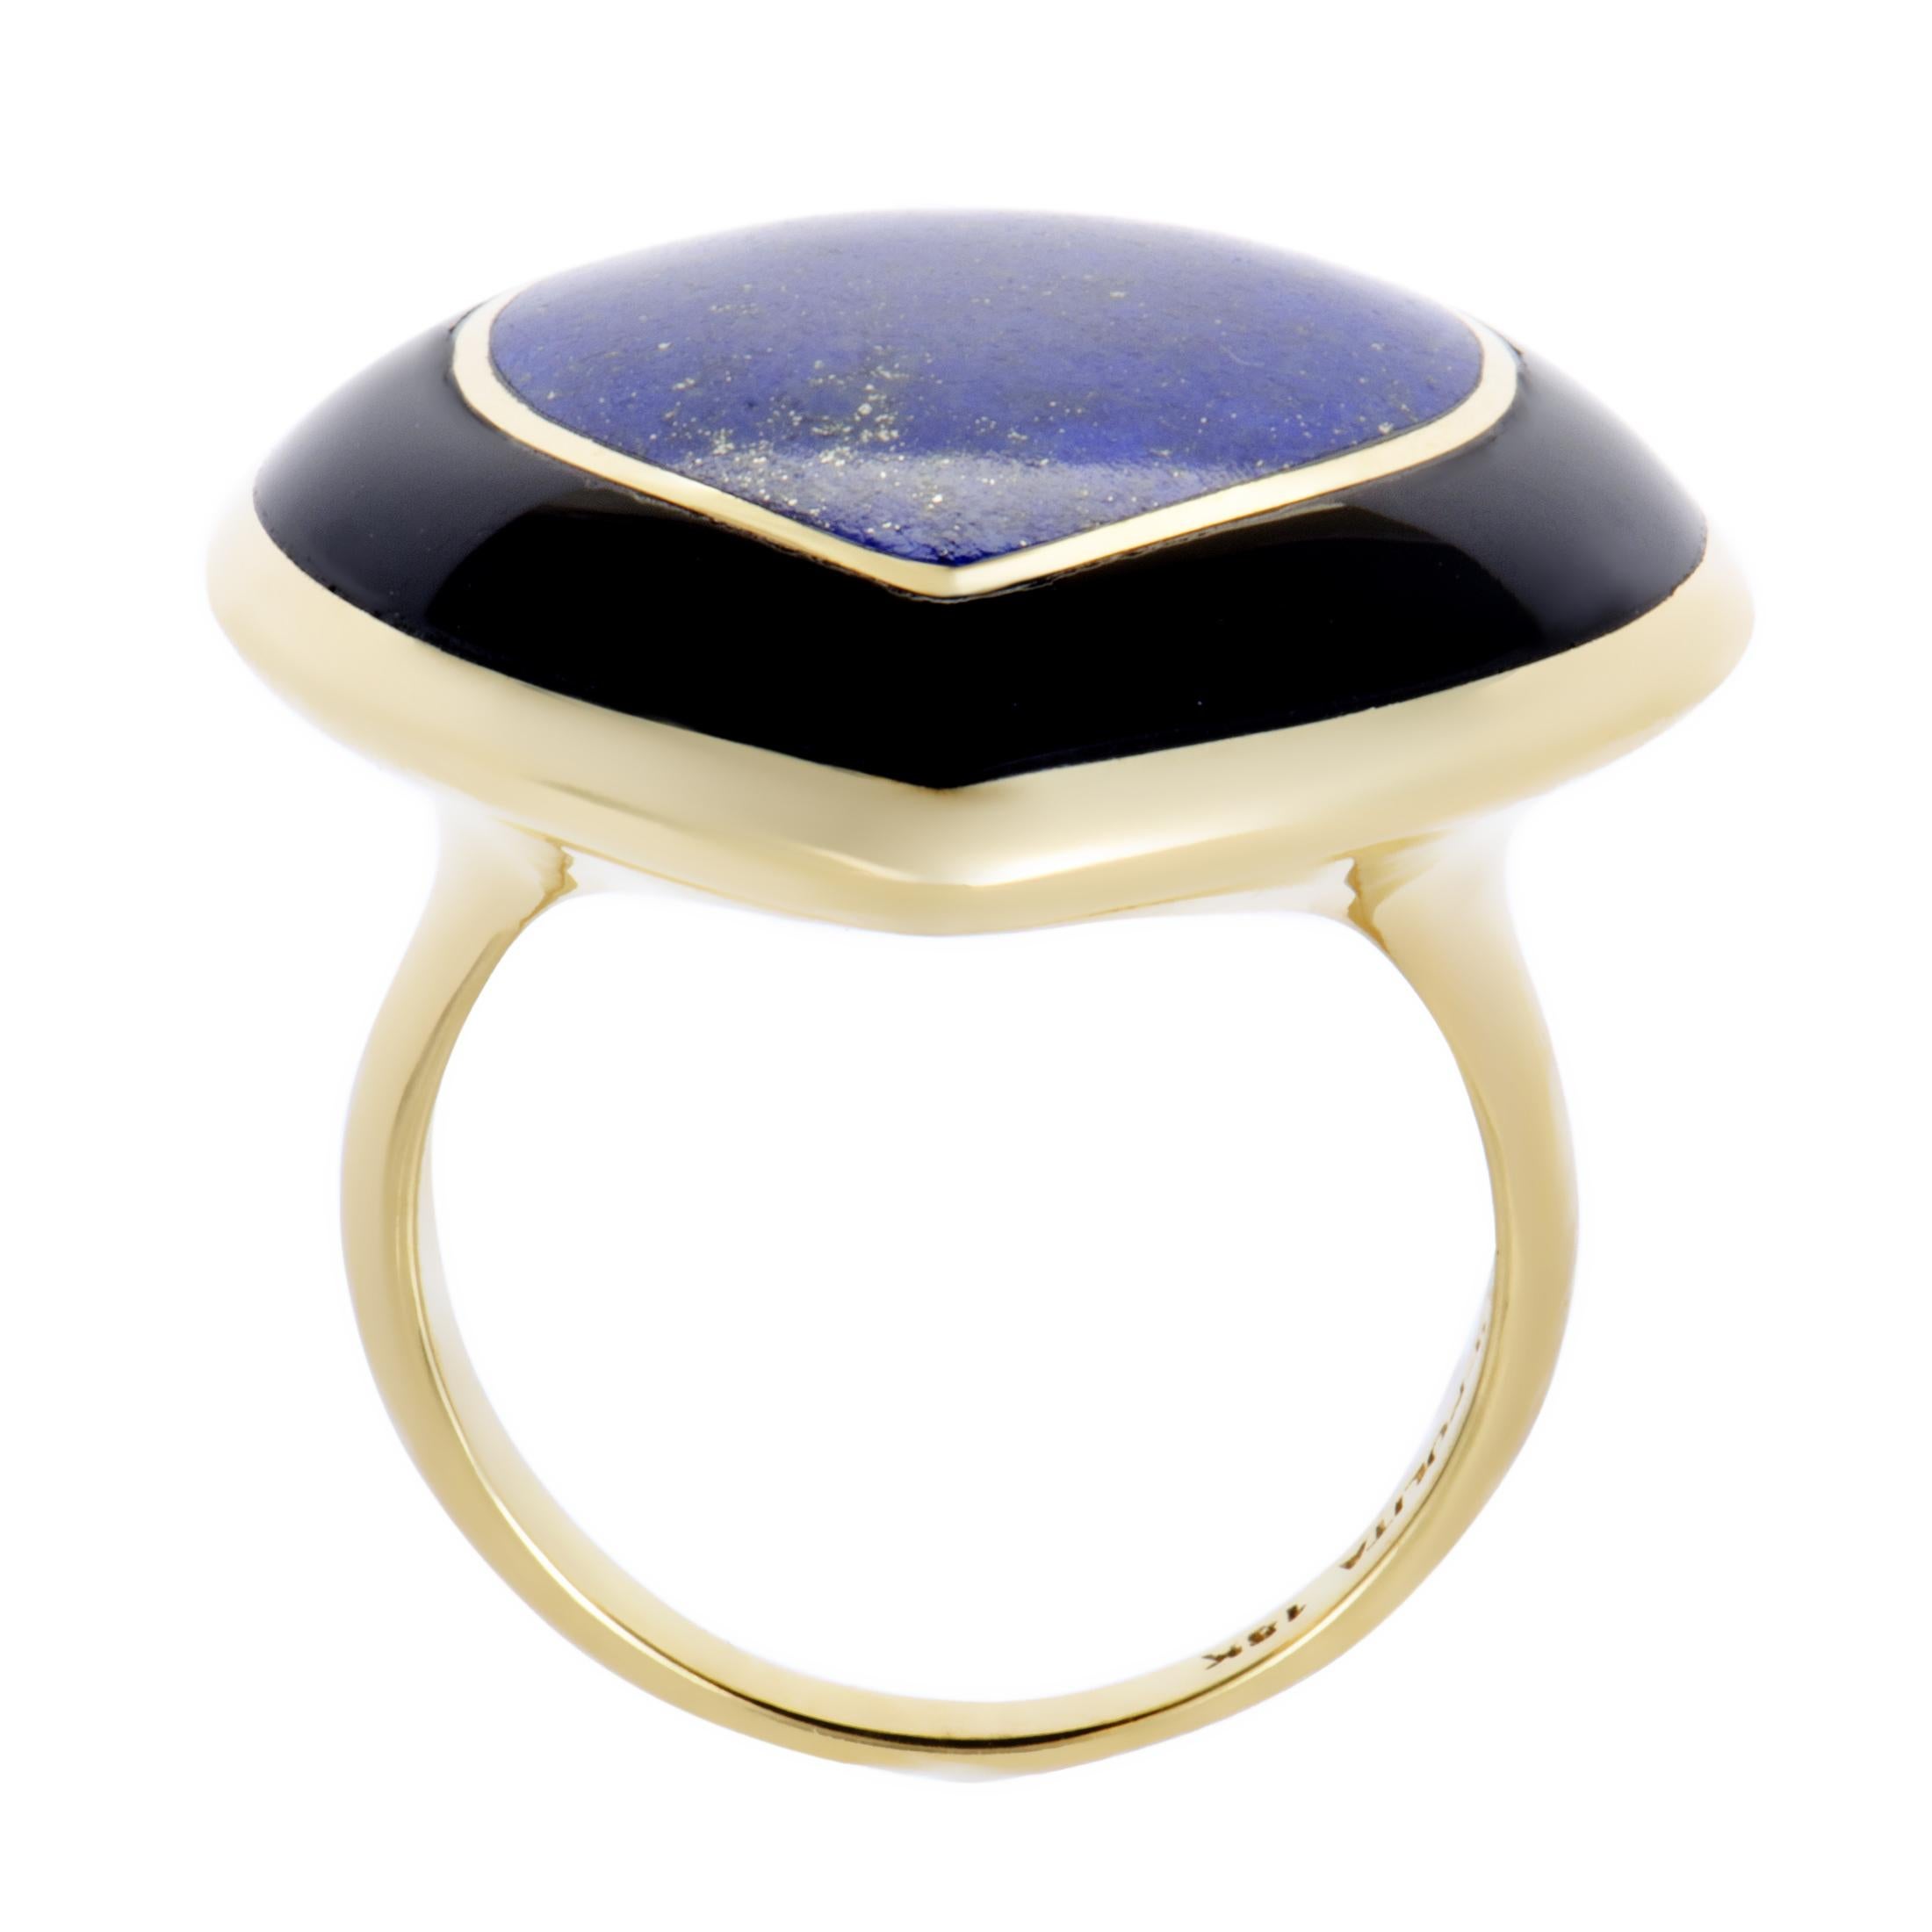 Class and prestige are embodied in this phenomenal ring that combines the eye-catching radiant allure of 18K yellow gold with captivating darkness of onyx and enchanting blue of lapis lazuli. The ring is an Ippolita design presented within the